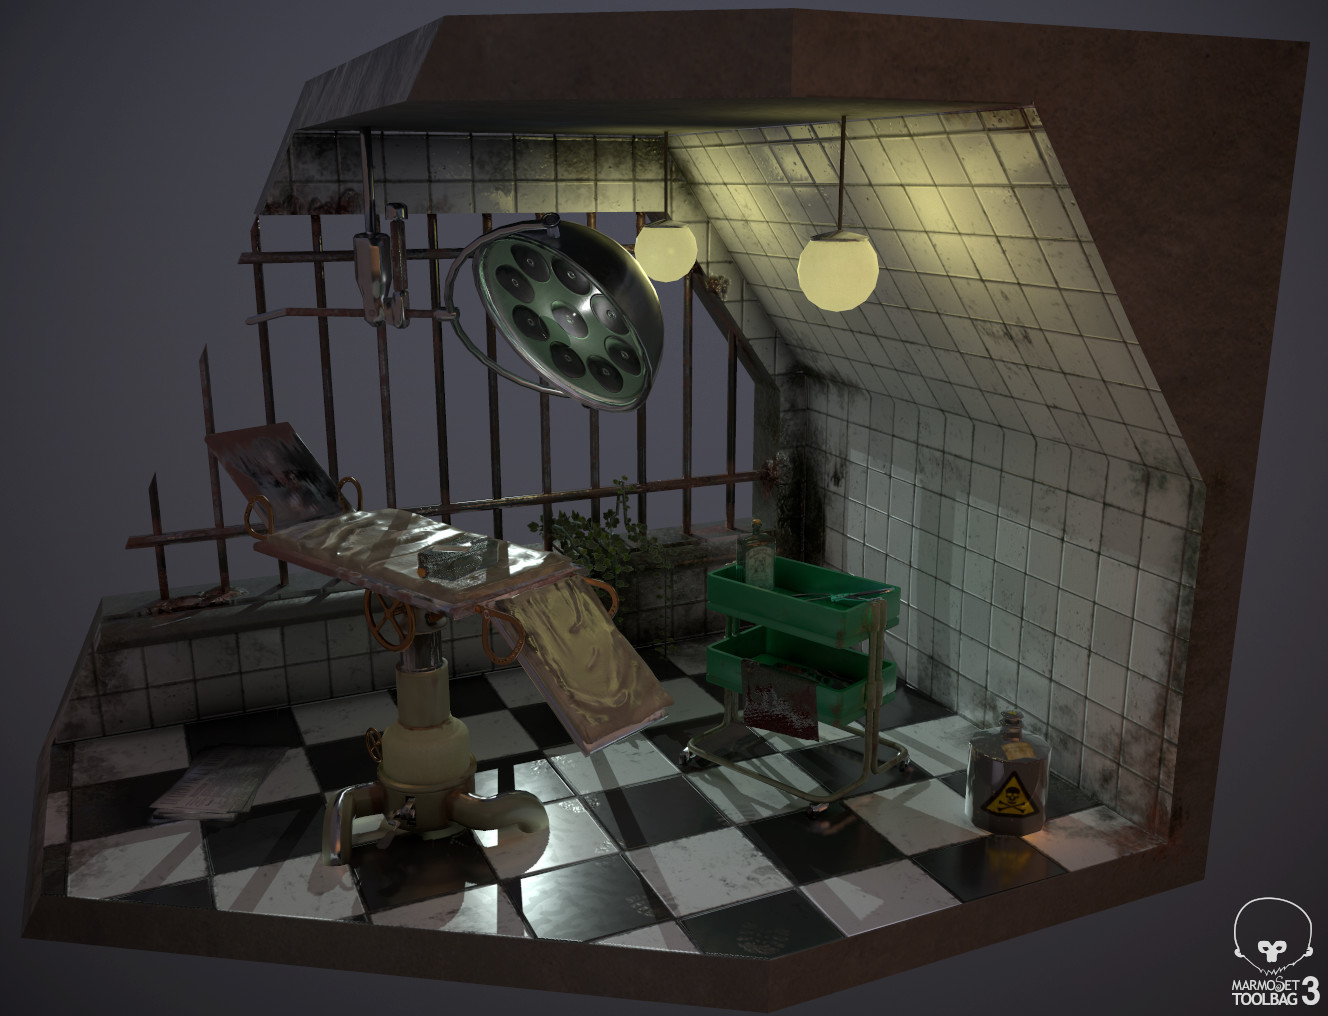 Complete Scene in Marmoset Toolbag 3